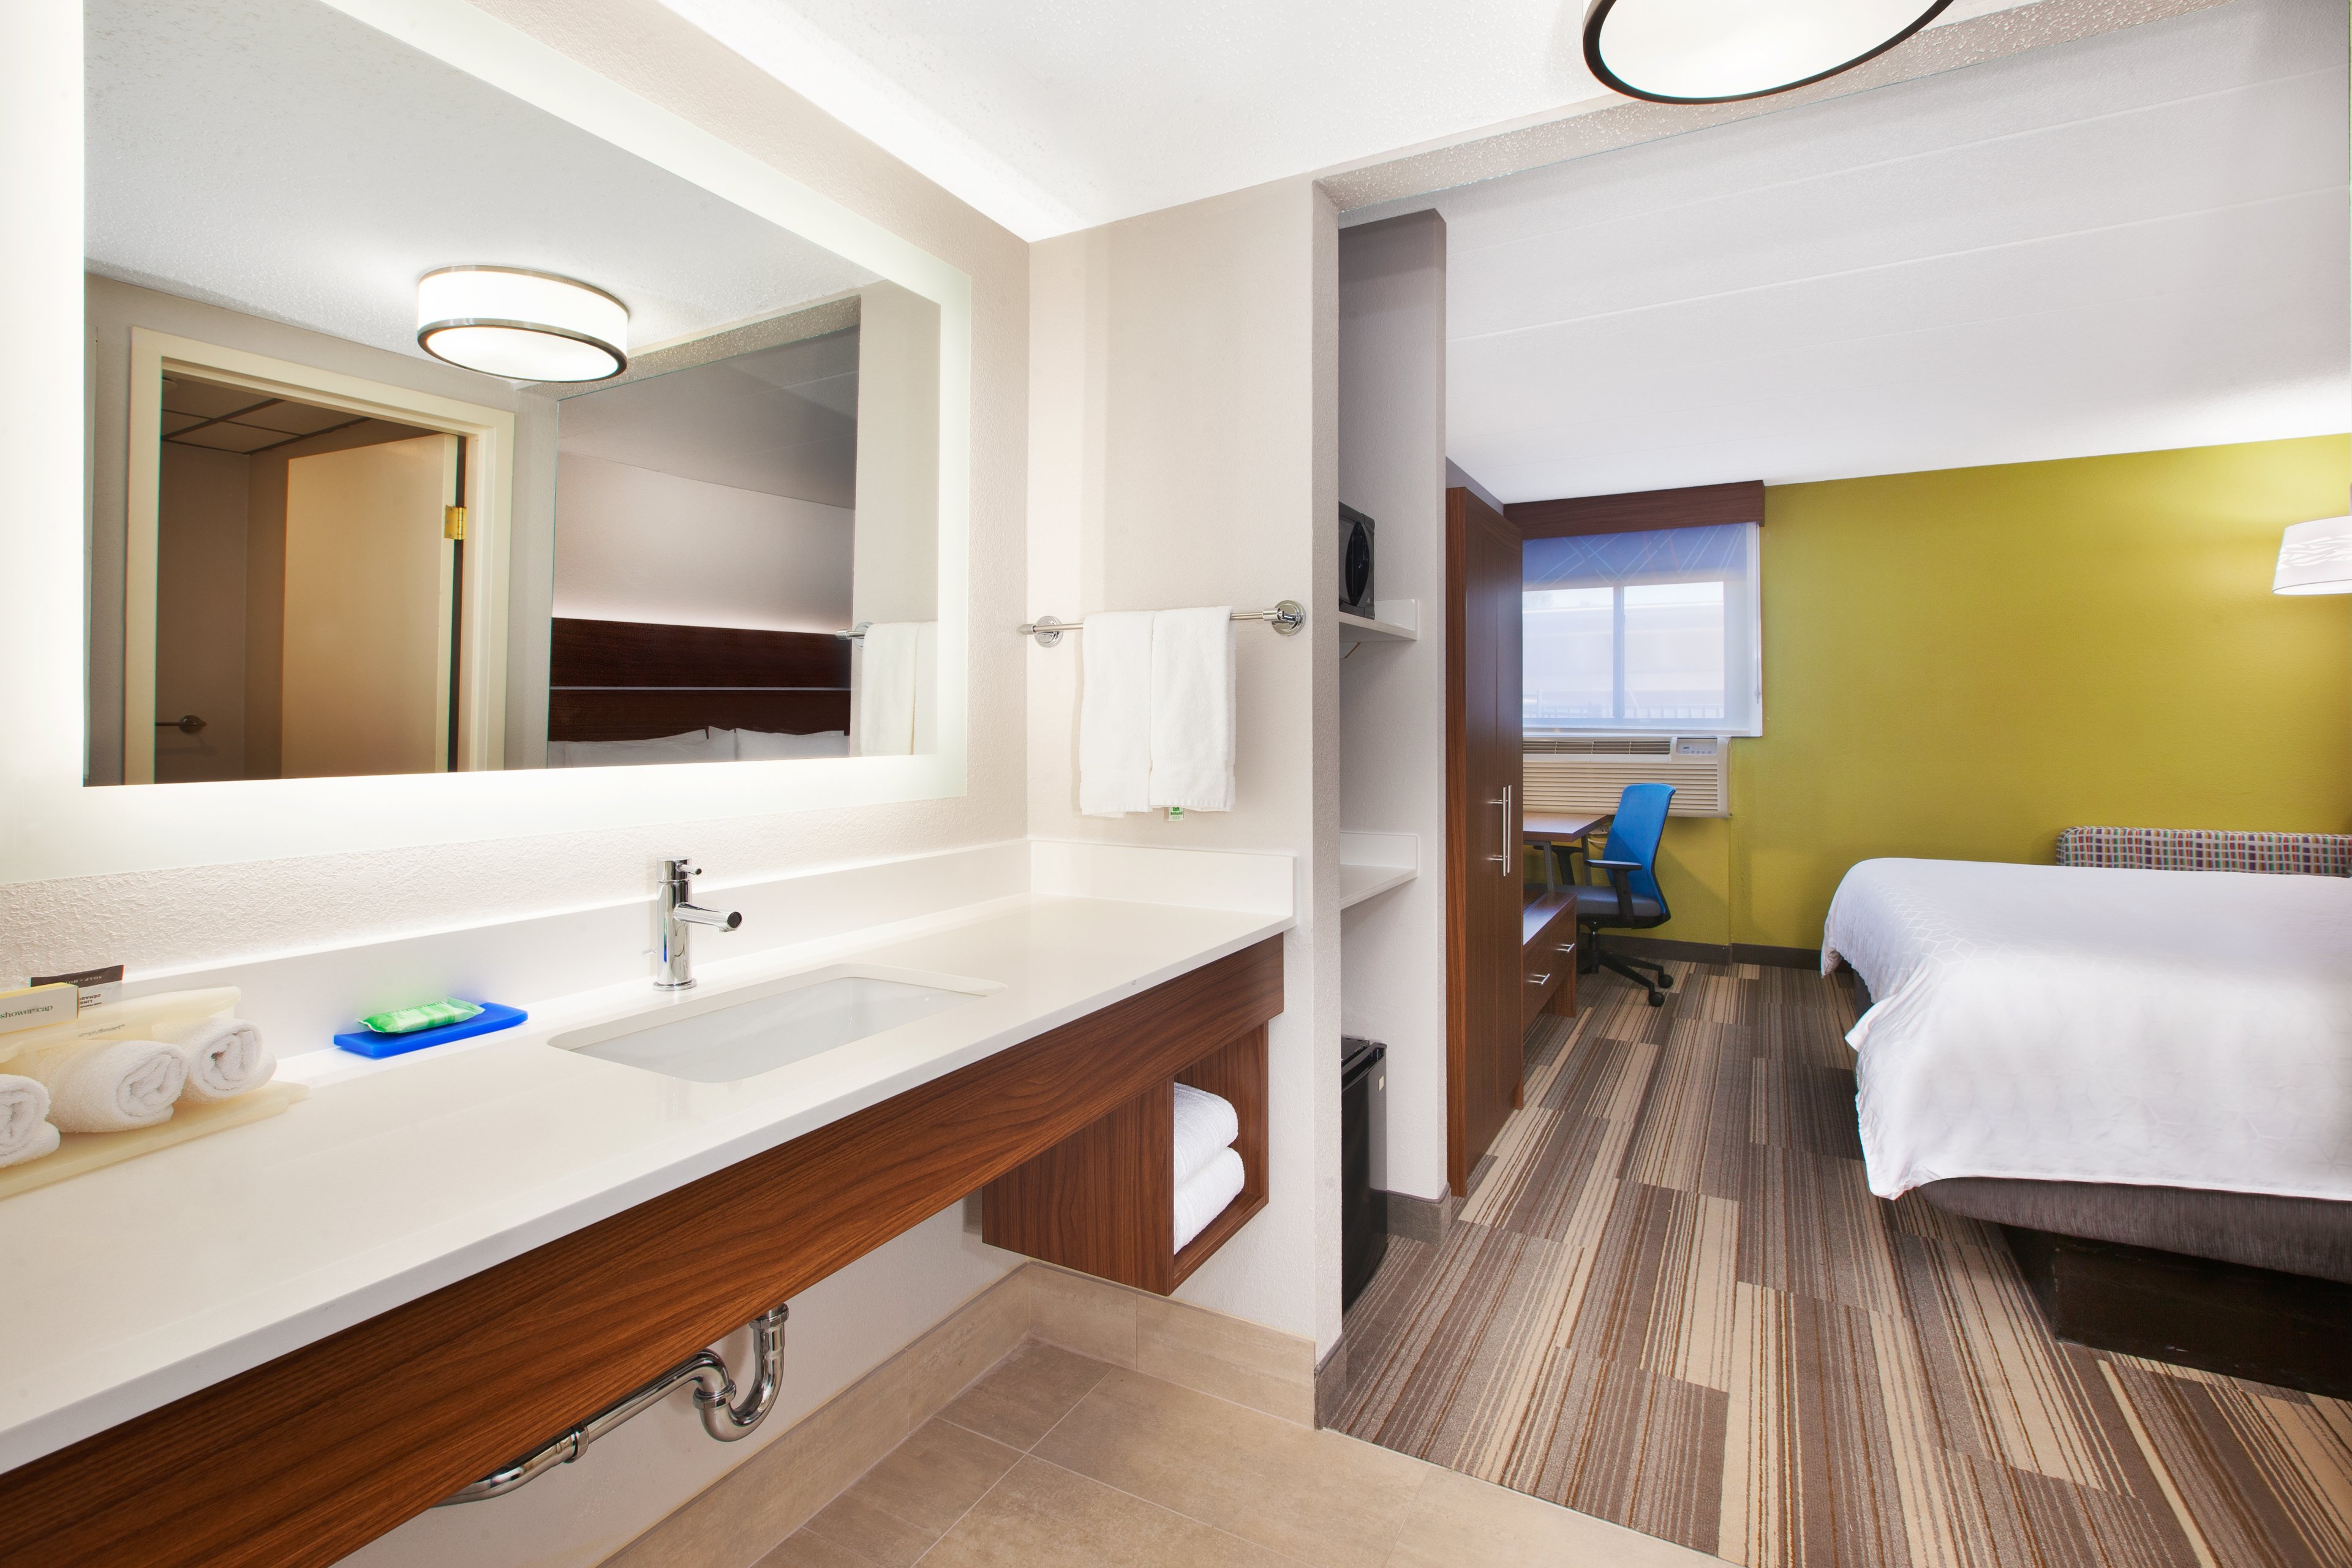 Enjoy the comfort of our King Bed with a spacious bathroom.